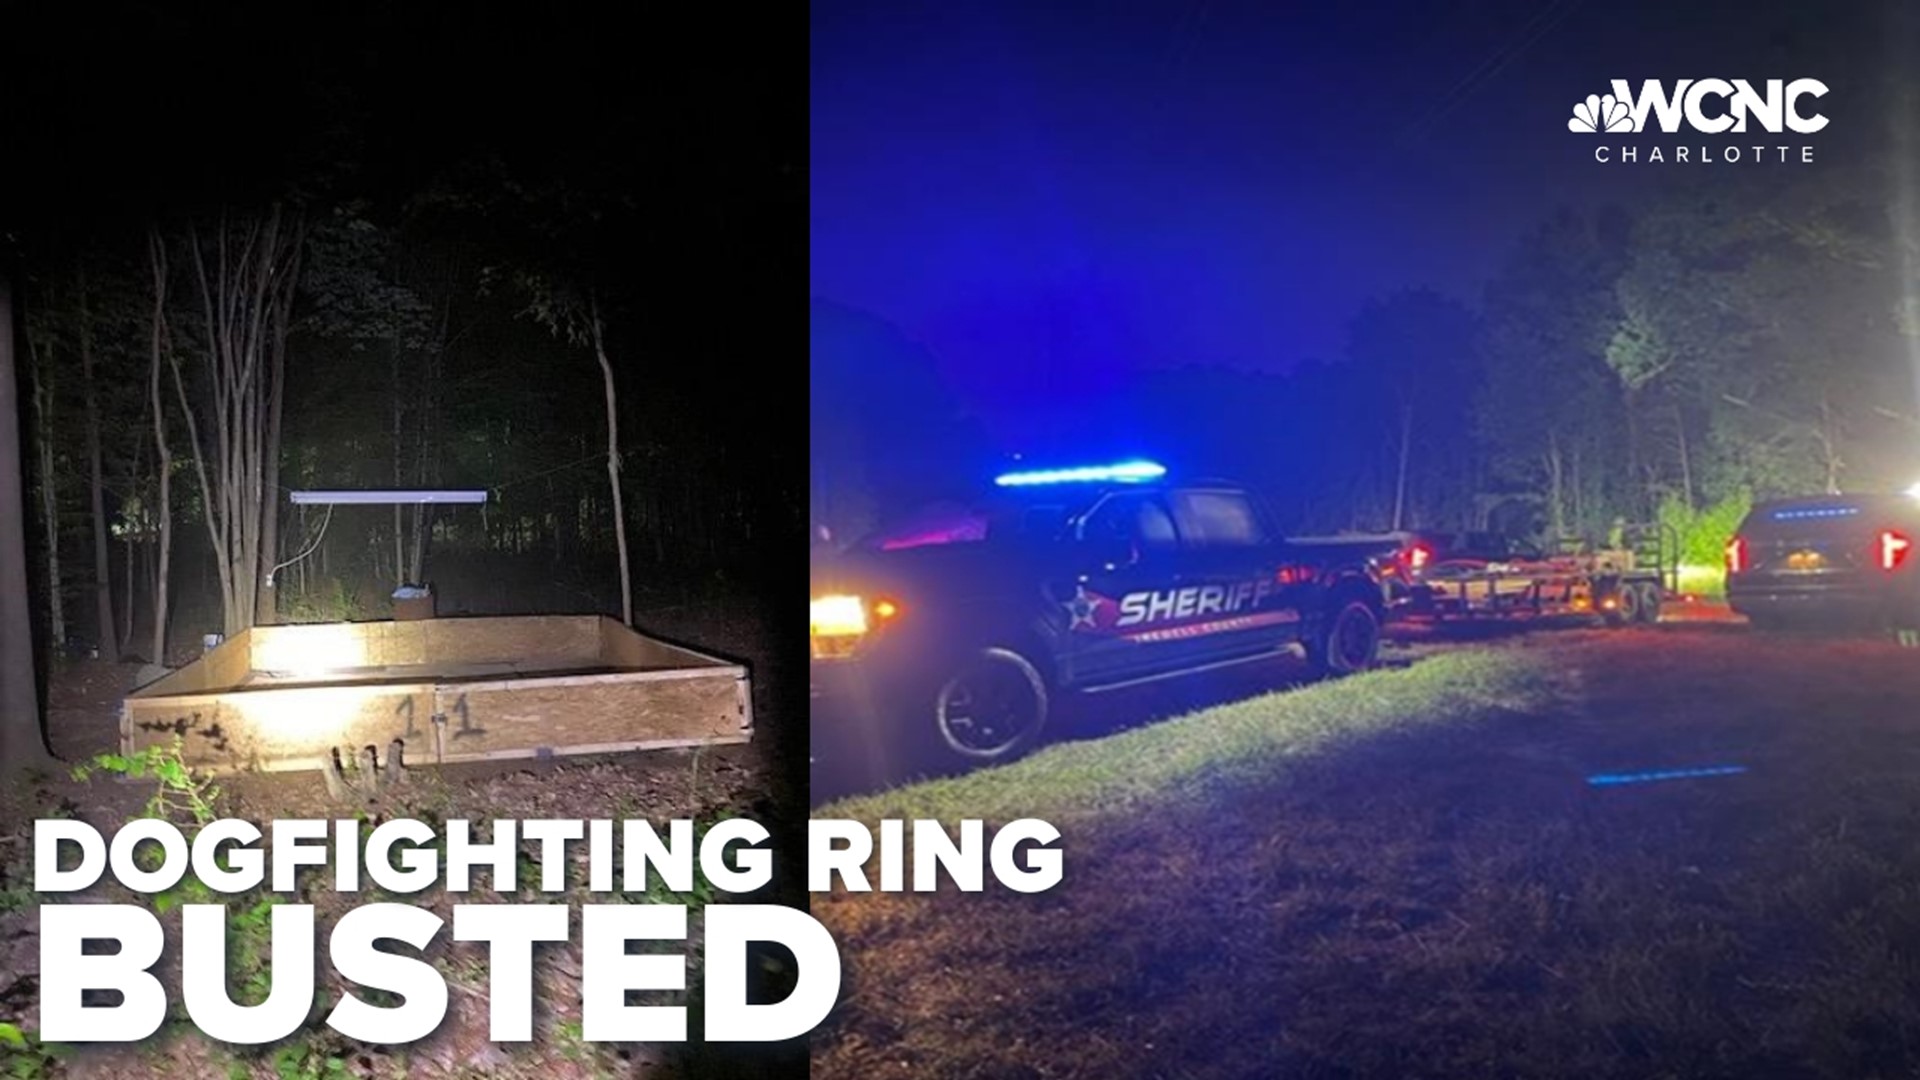 According to the sheriff's office, an anonymous caller alerted it to a possible dog-fighting event happening on Sena Lane, east of Statesville.